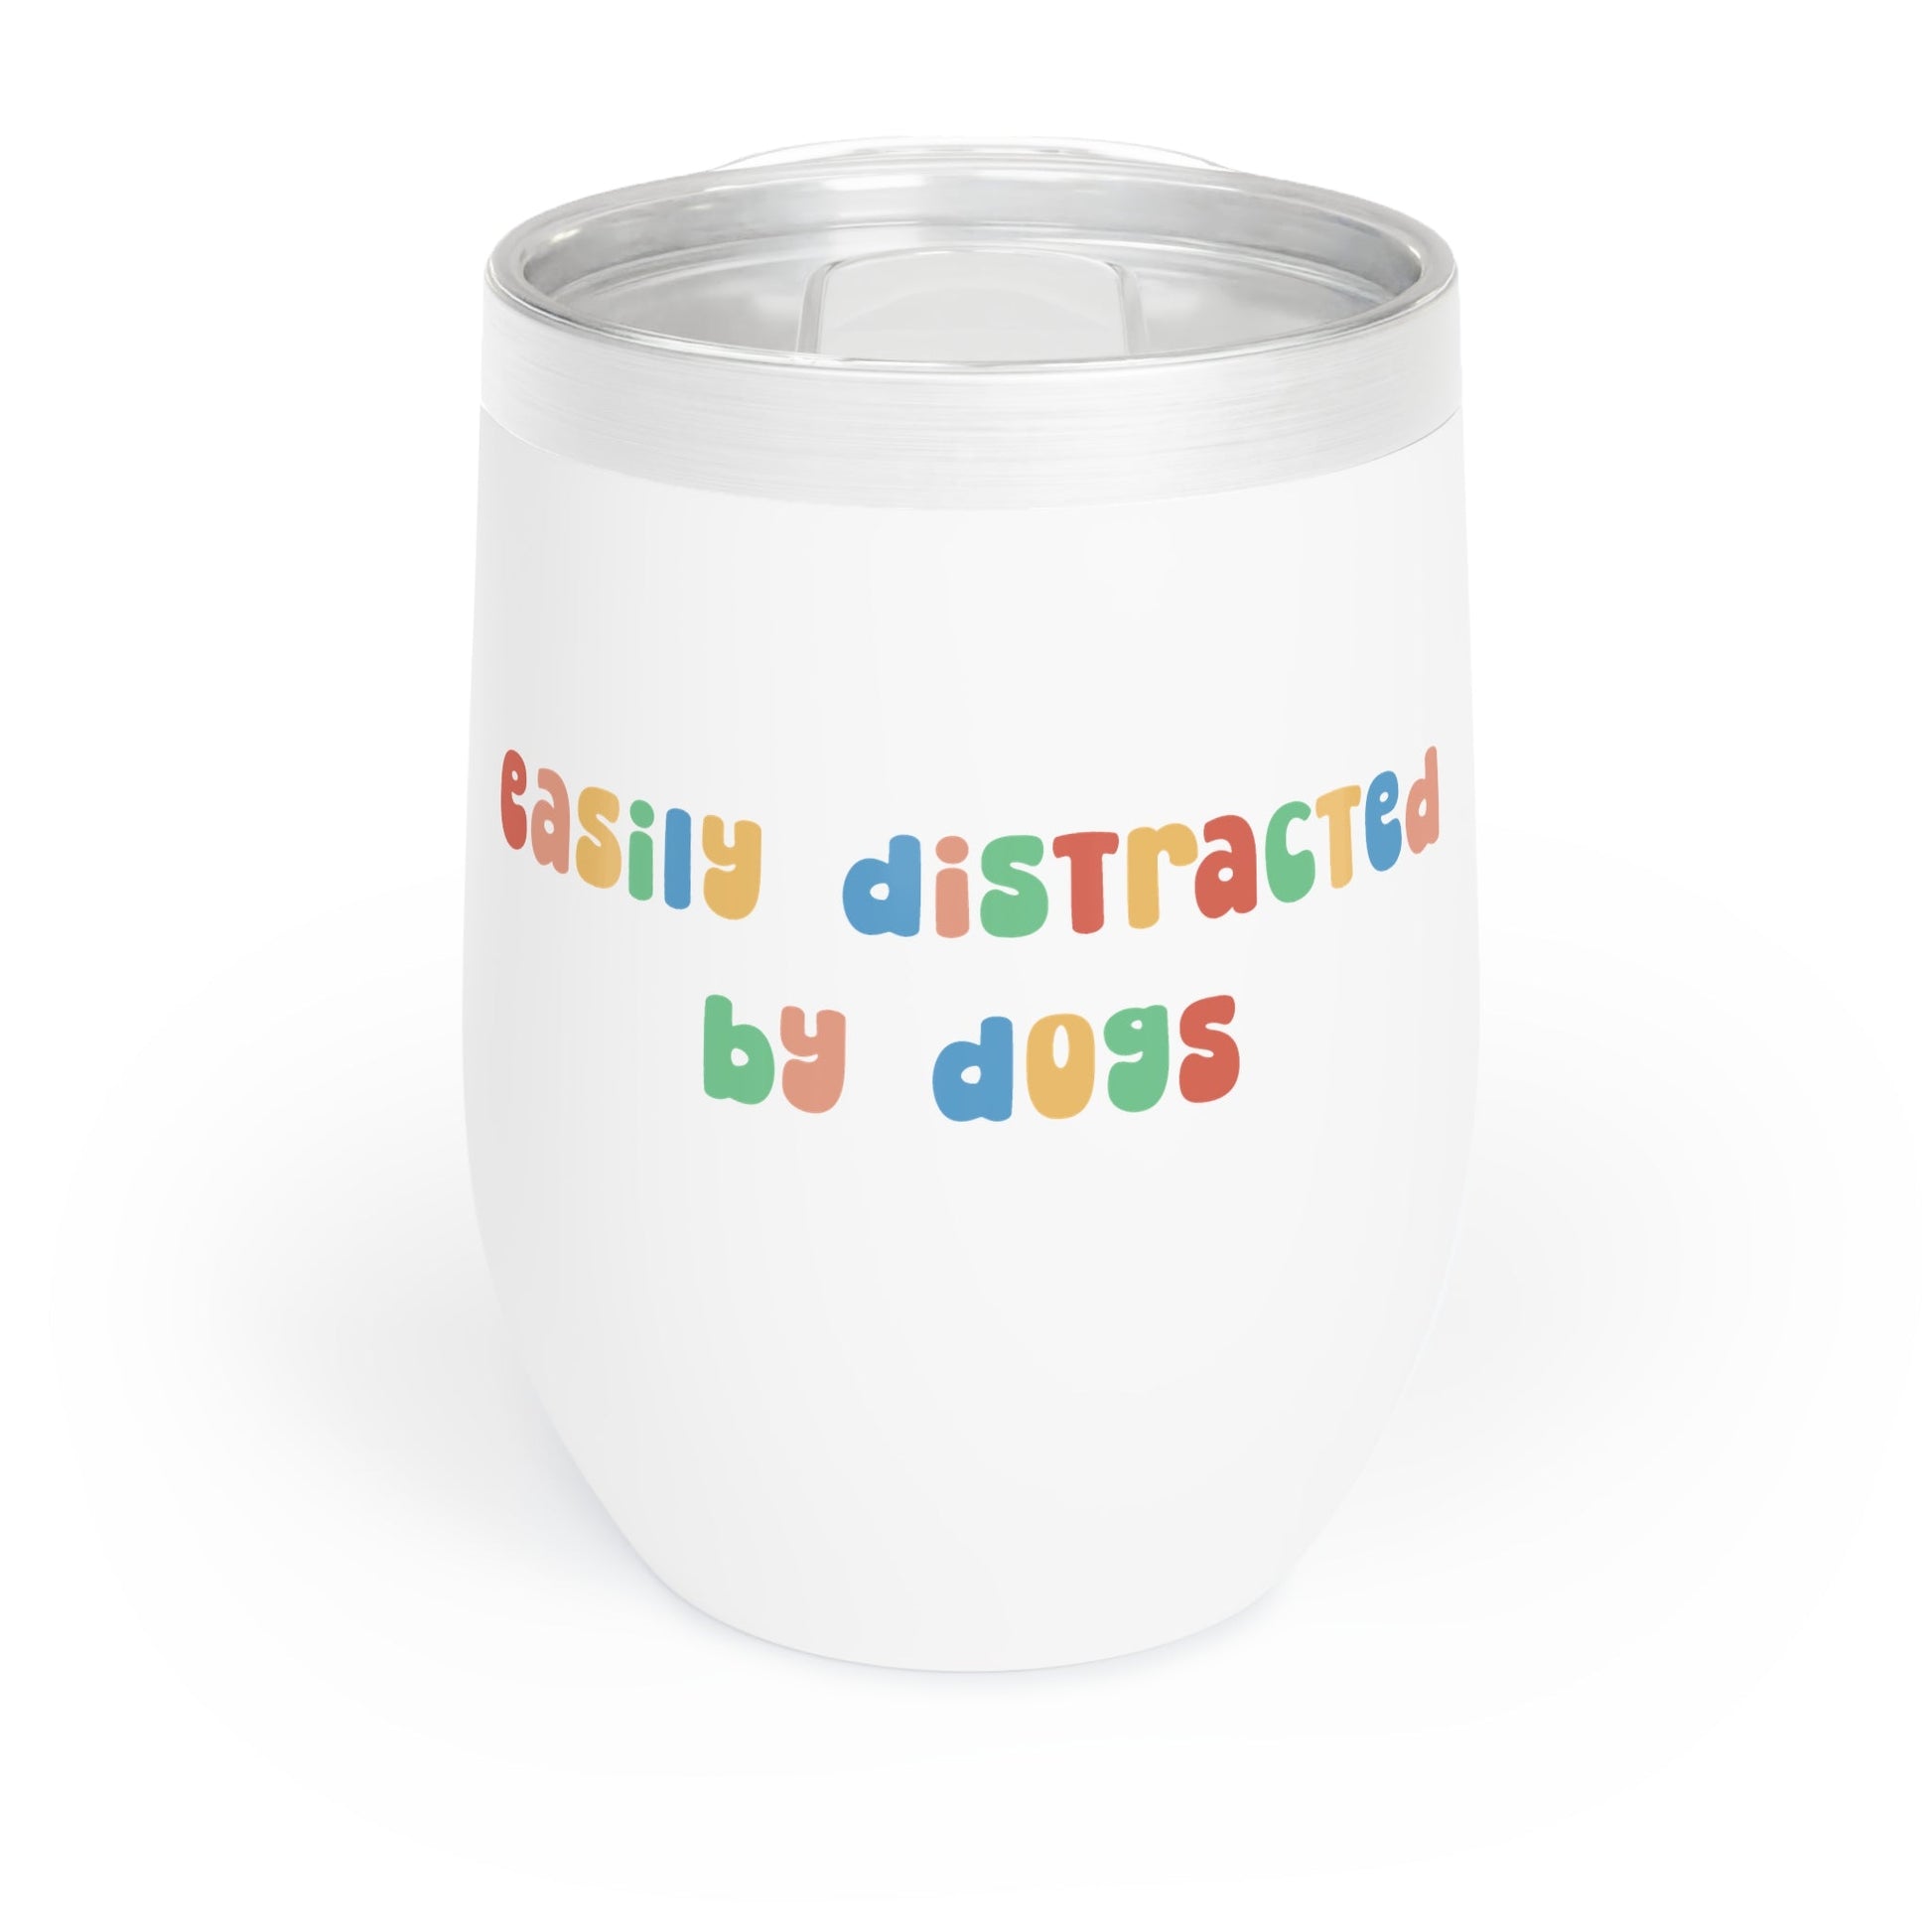 Easily Distracted by Dogs | Wine Tumbler - Detezi Designs-32203523071287591493